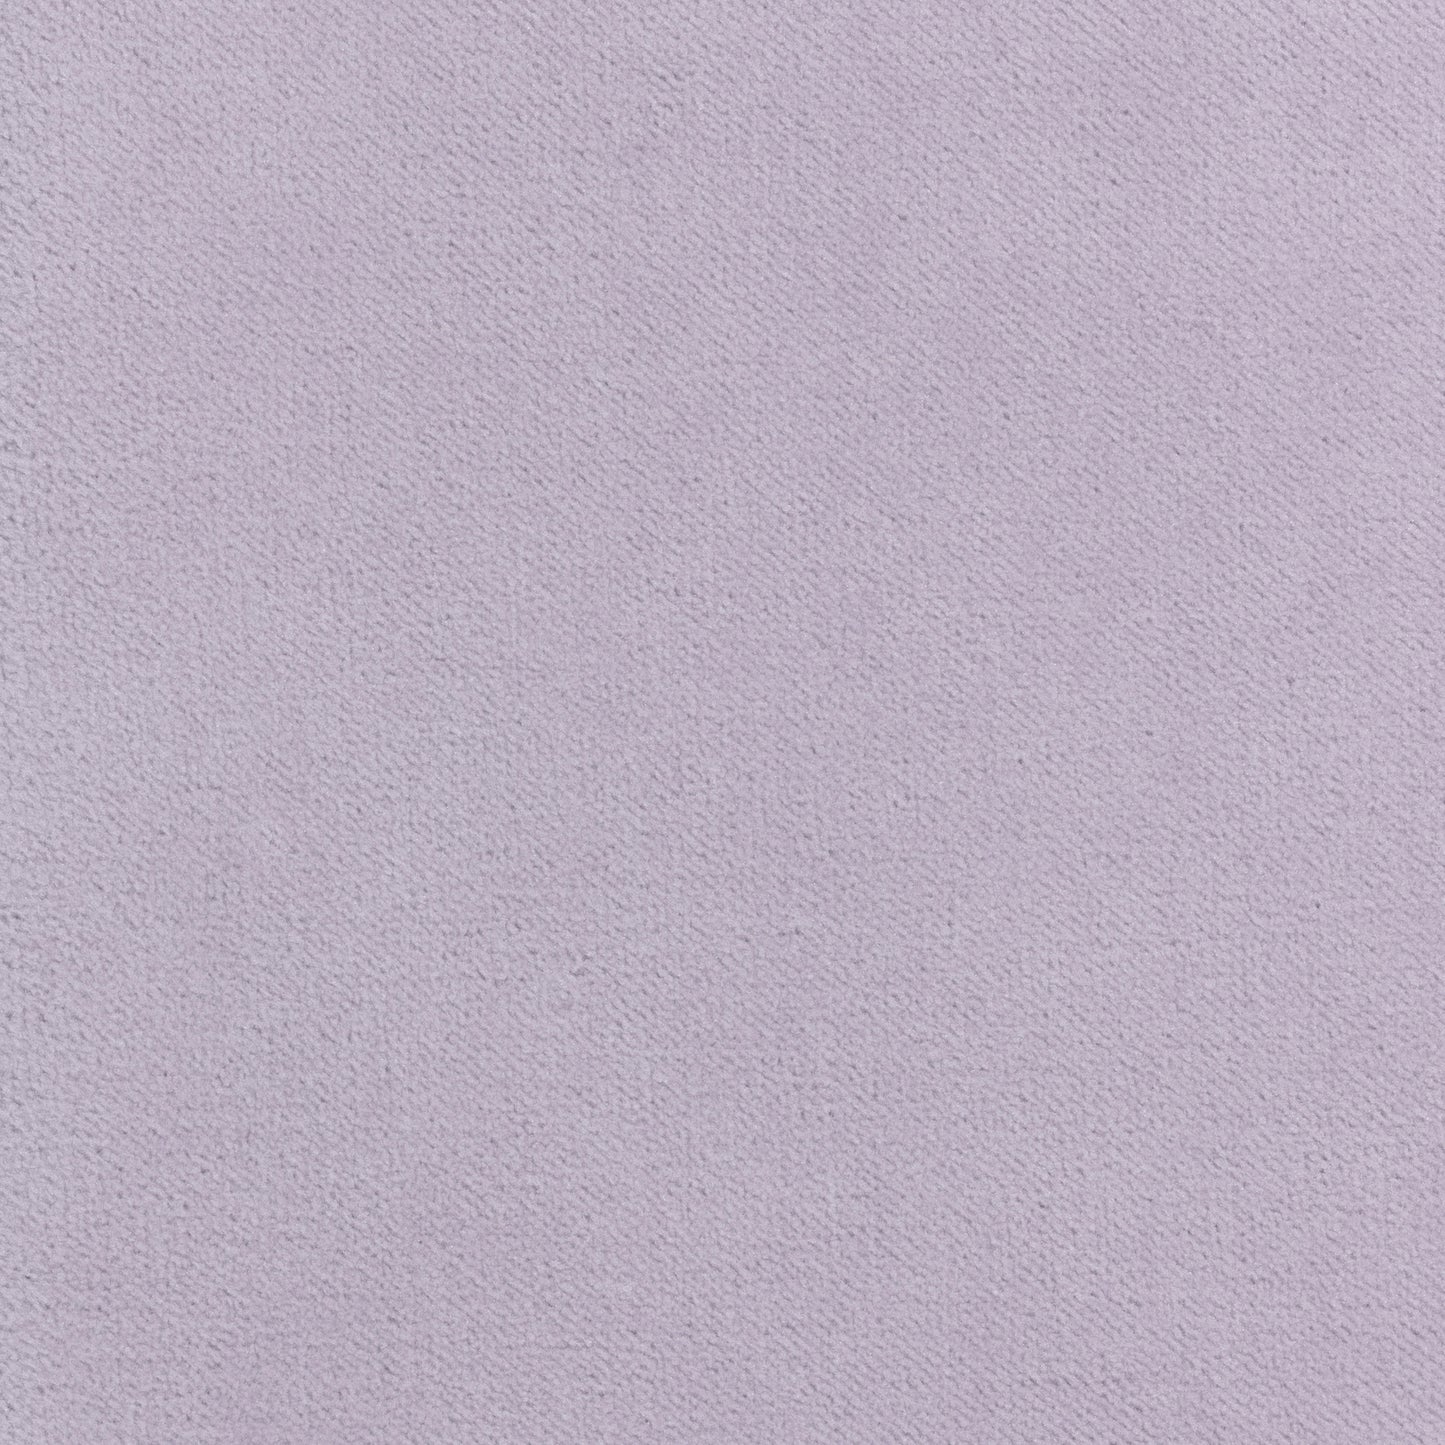 Purchase Thibaut Fabric Product# W7214 pattern name Club Velvet color Lilac